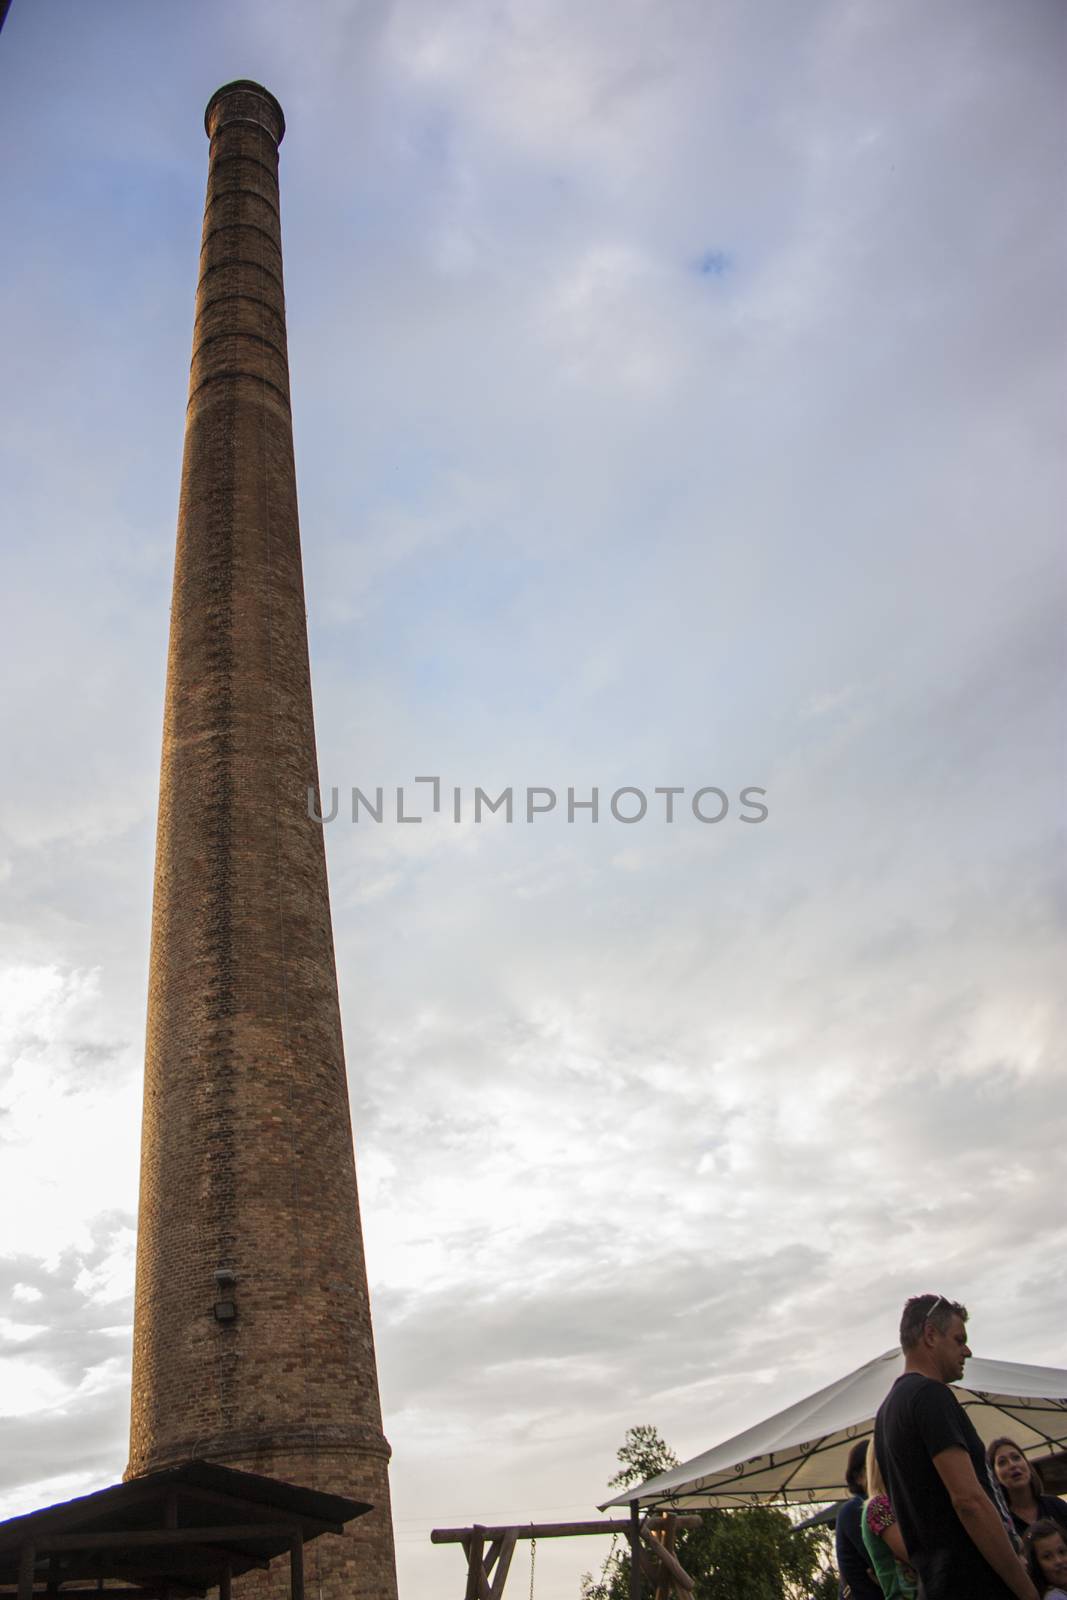 LOREO, ITALY 24 MARCH 2020: Ancient industrial chimney in Loreo, Italy